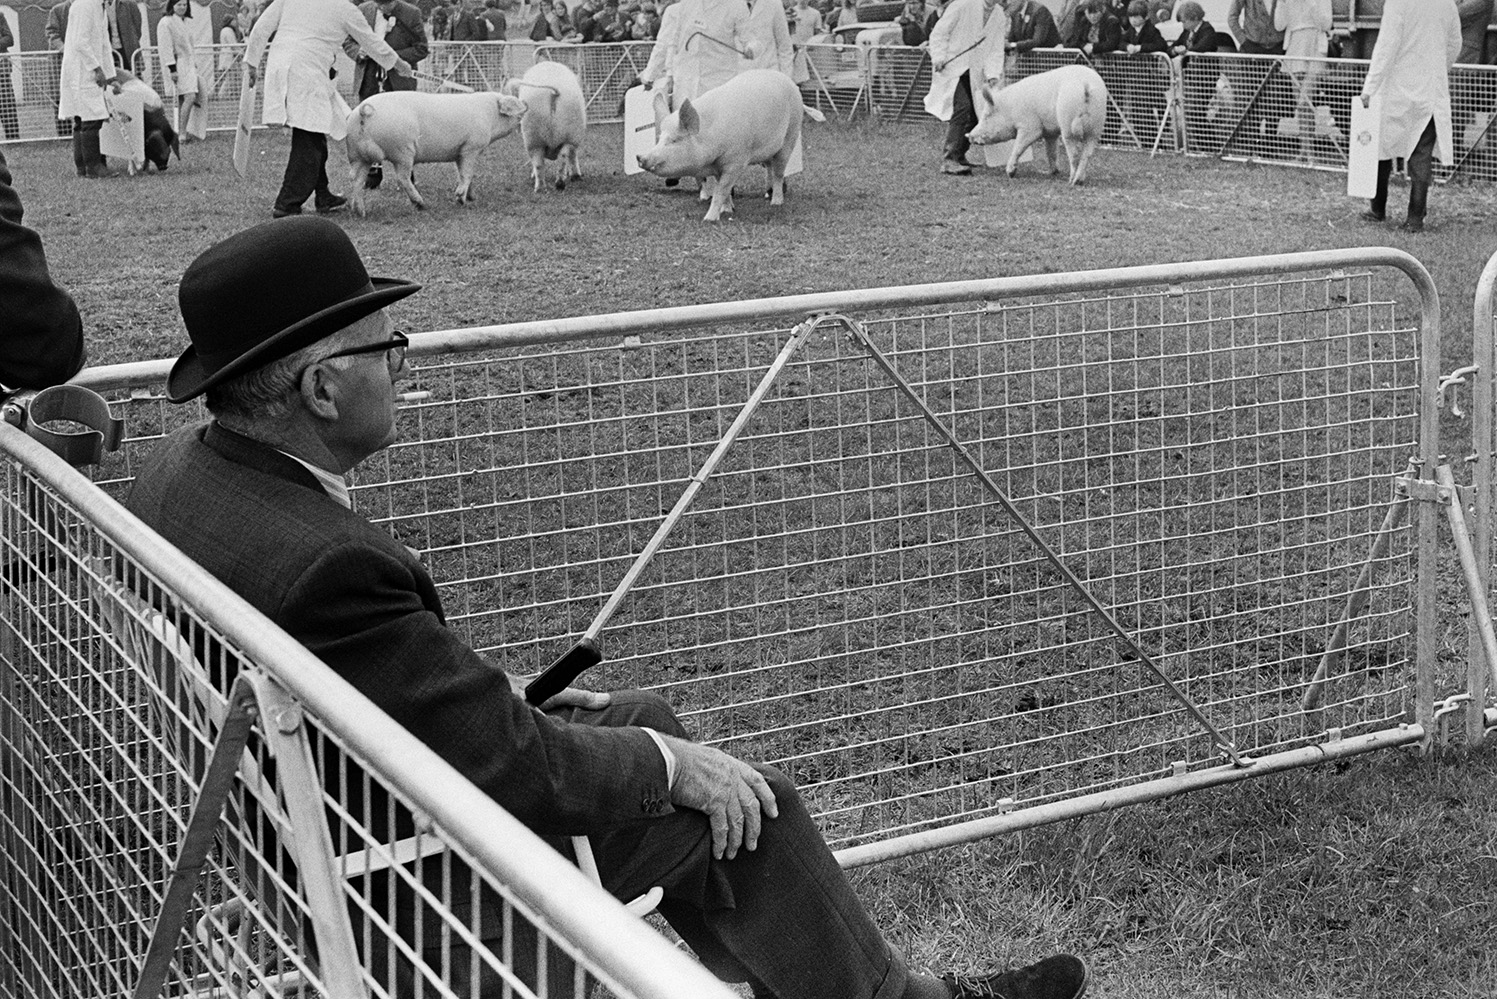 A man wearing a bowler hat and smoking a cigarette, seated in a pen with pigs being shown at the Devon County Show in Whipton, Exeter. He is possibly judging the pig show.